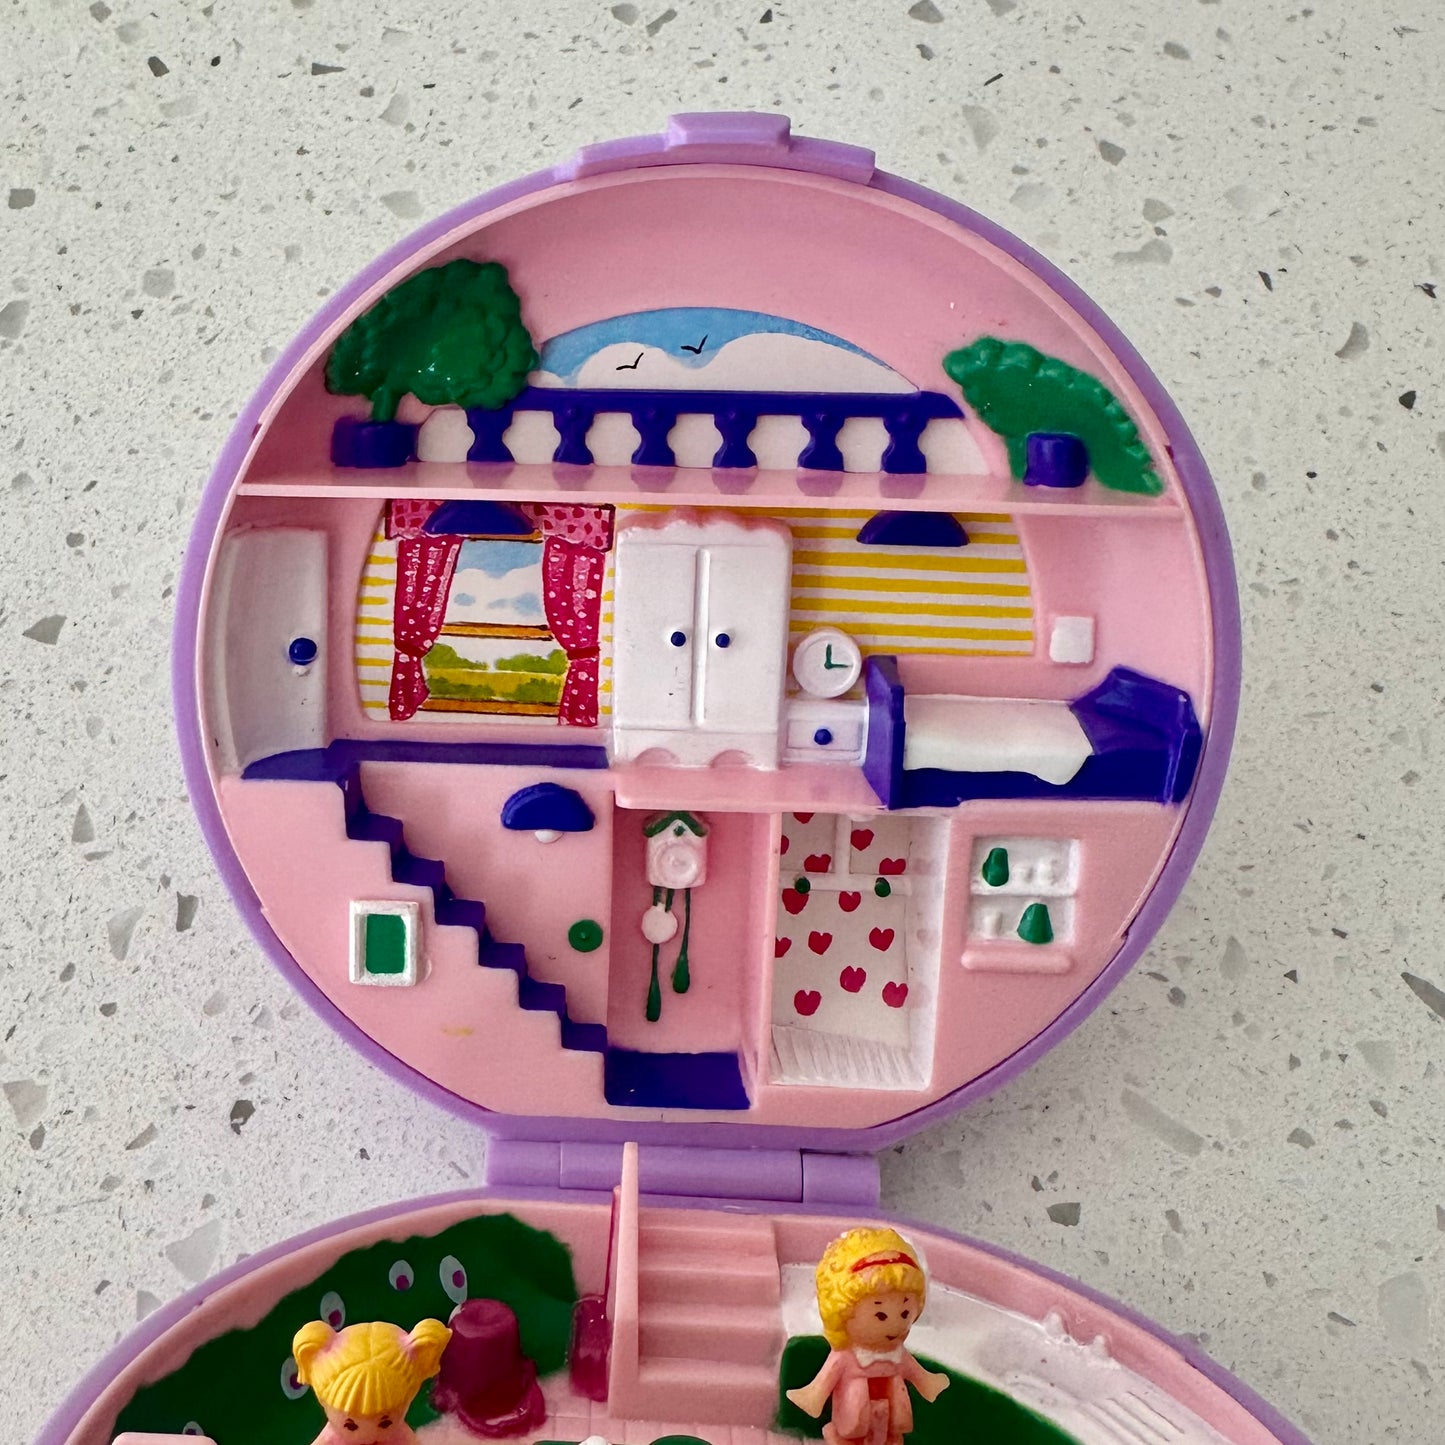 1989 Polly Pocket Polly’s Flat 100% Complete